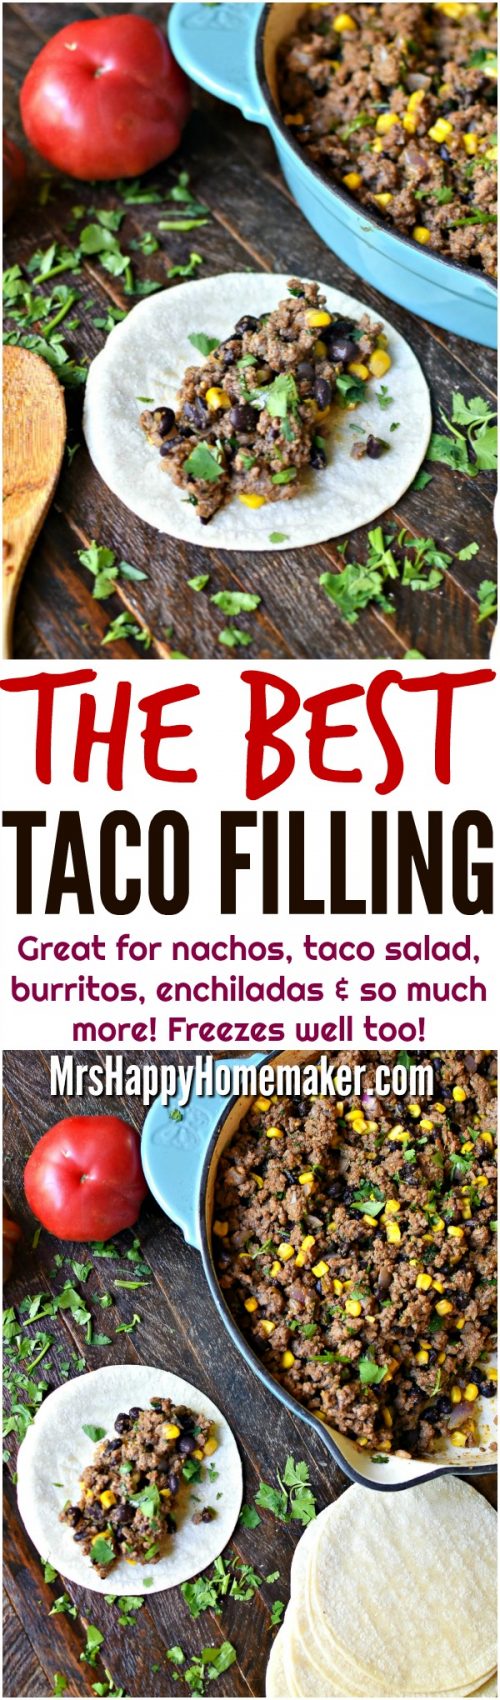 The Best Taco Filling | MrsHappyHomemaker.com @thathousewife